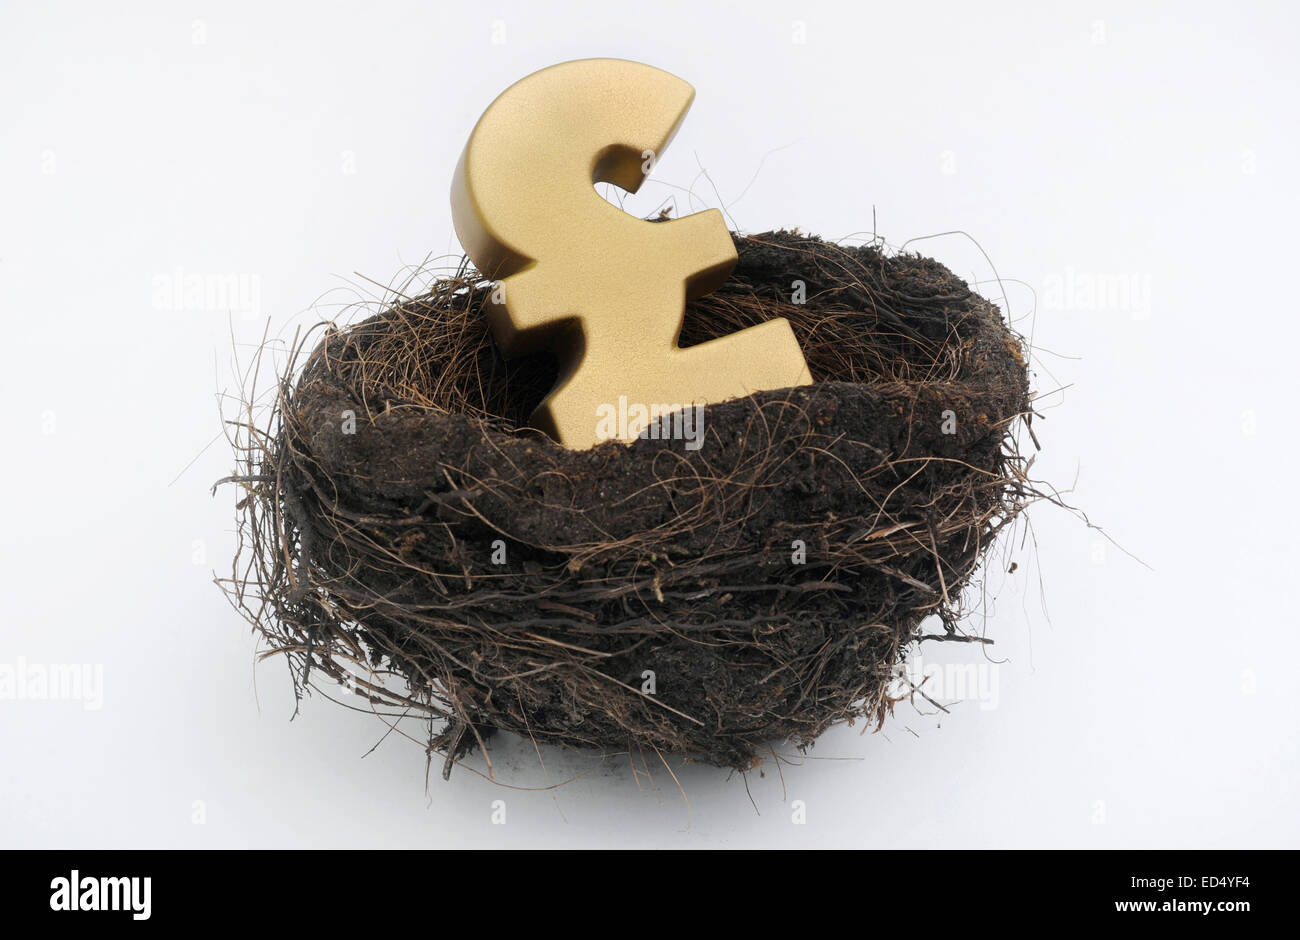 BRITISH POUND SIGN IN BIRDS NEST RE THE ECONOMY NEST EGG SAVINGS PENSIONS RETIREMENT PENSIONERS MONEY FUTURE INVESTMENTS CASH UK Stock Photo